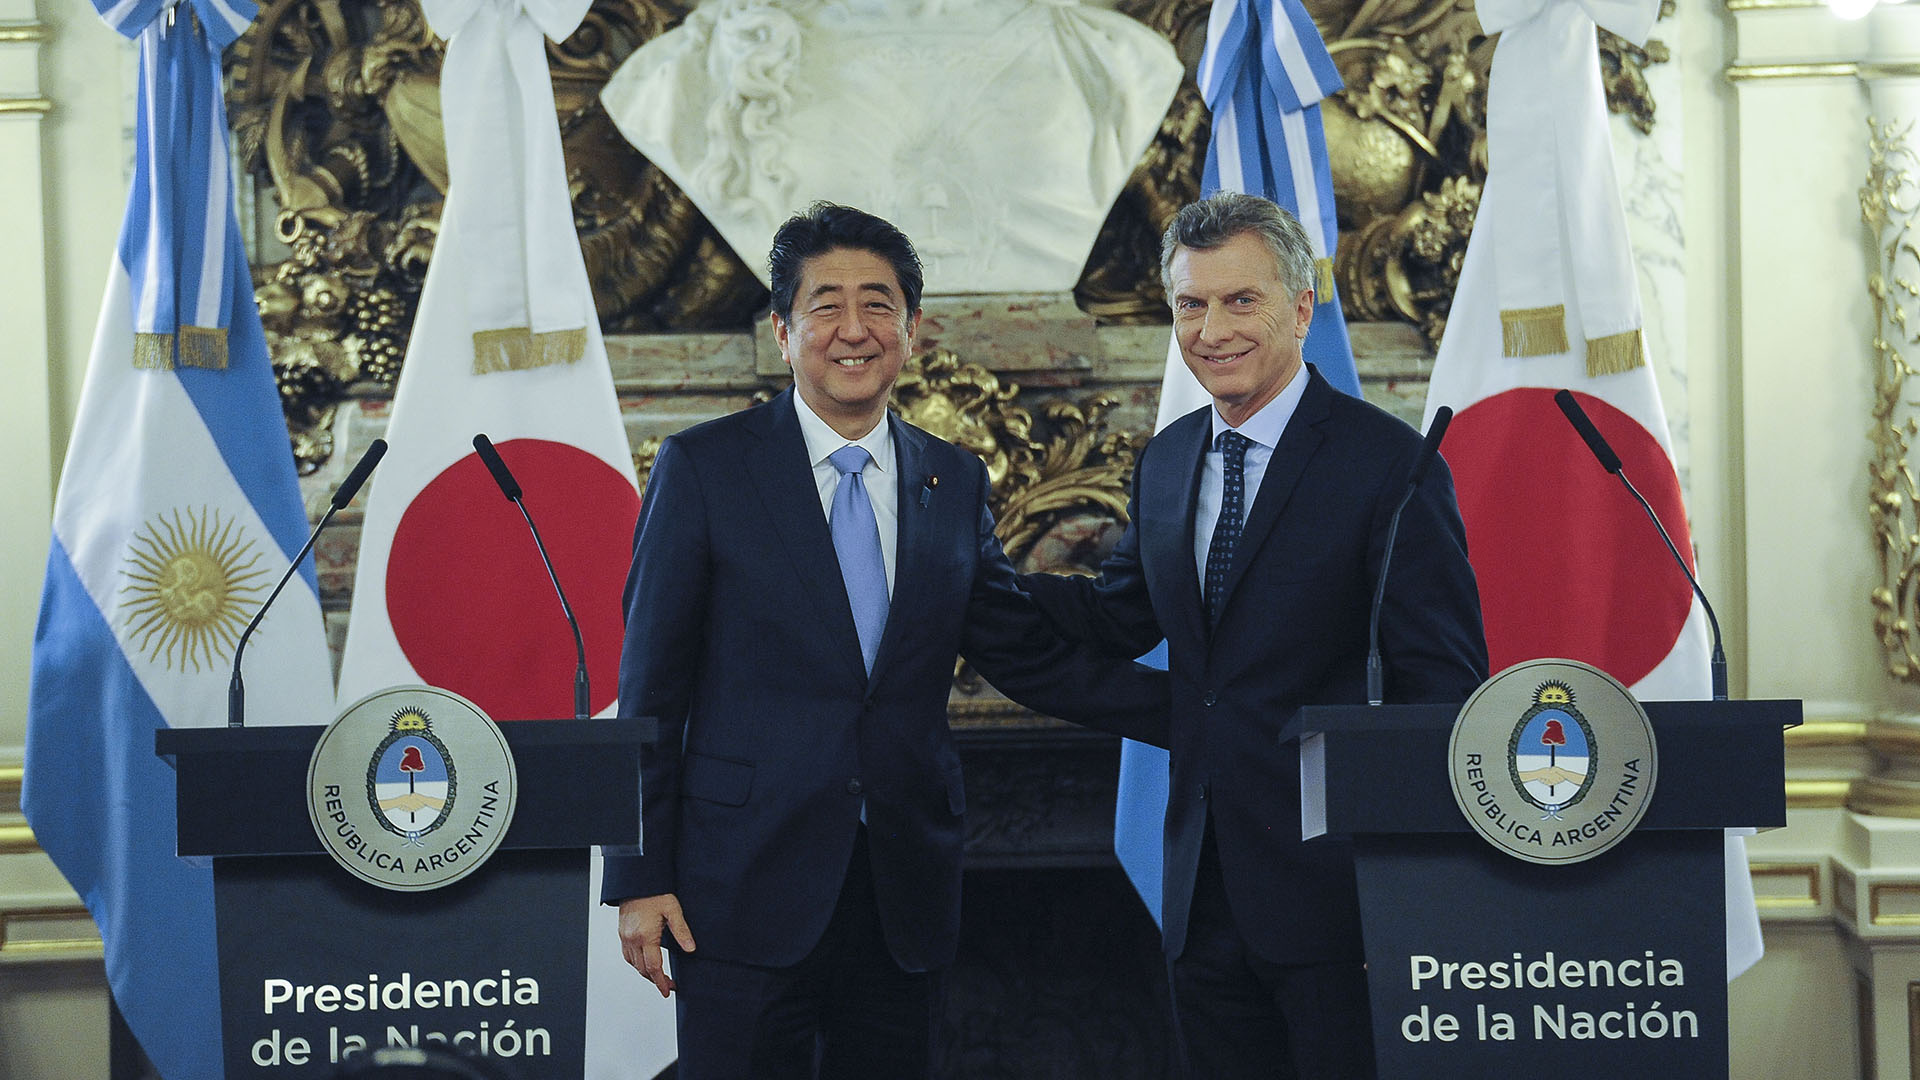 Shinzo Abe was one of the world leaders who participated in the G20 organized in Buenos Aires (Télam)